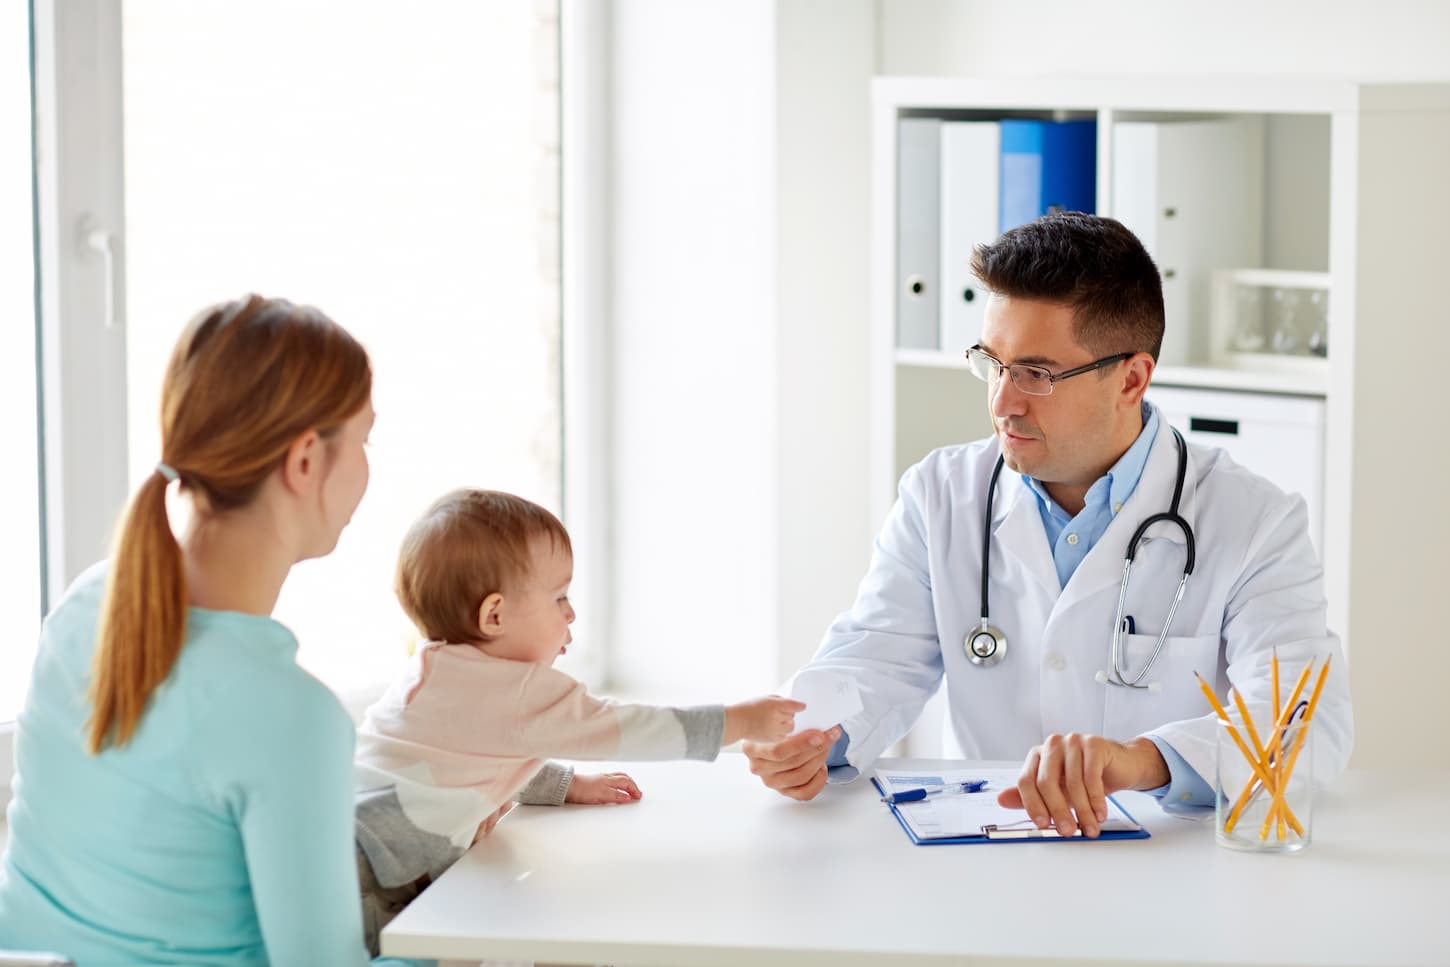 An image of a mother with her baby talking to their pediatrician in a clinic set-up.